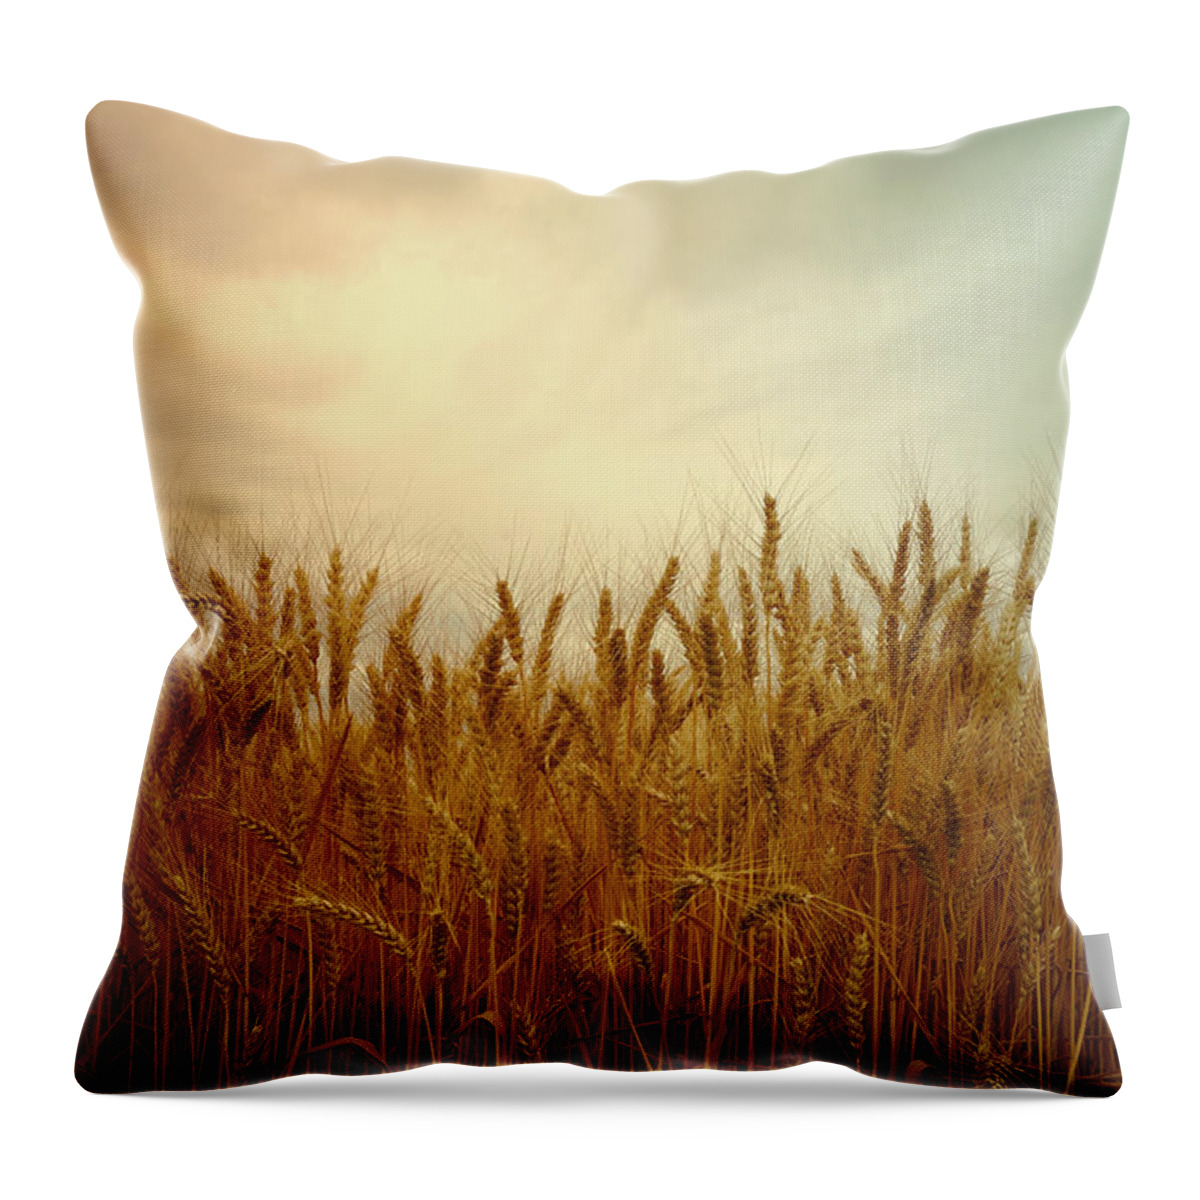 Wheat Throw Pillow featuring the photograph Golden Wheat by Kae Cheatham